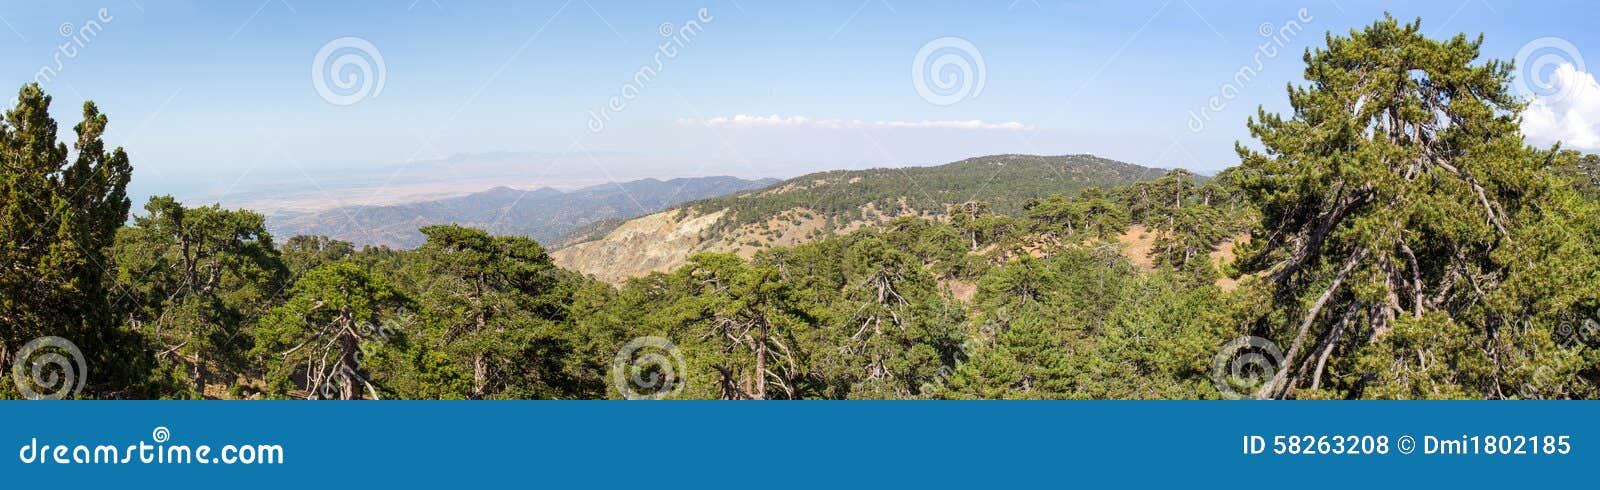 Cyprus. Panorama Of Mountain Peaks And A Growing Black ...